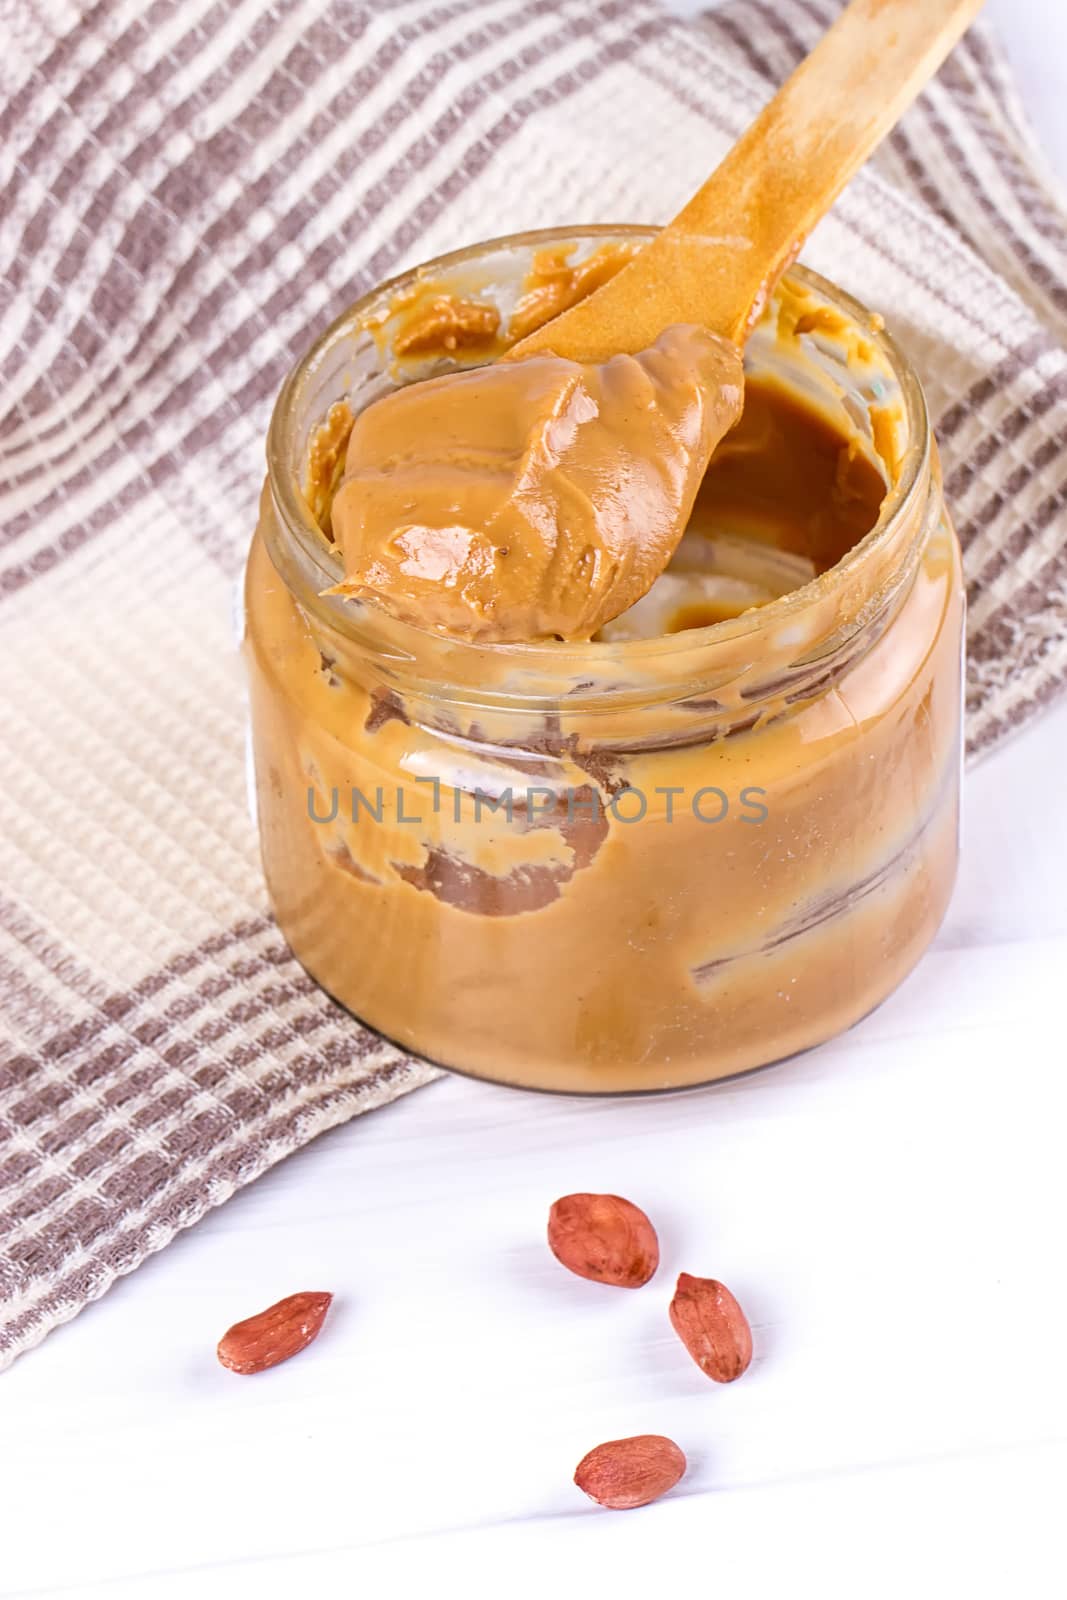 peanut butter with spoon by victosha